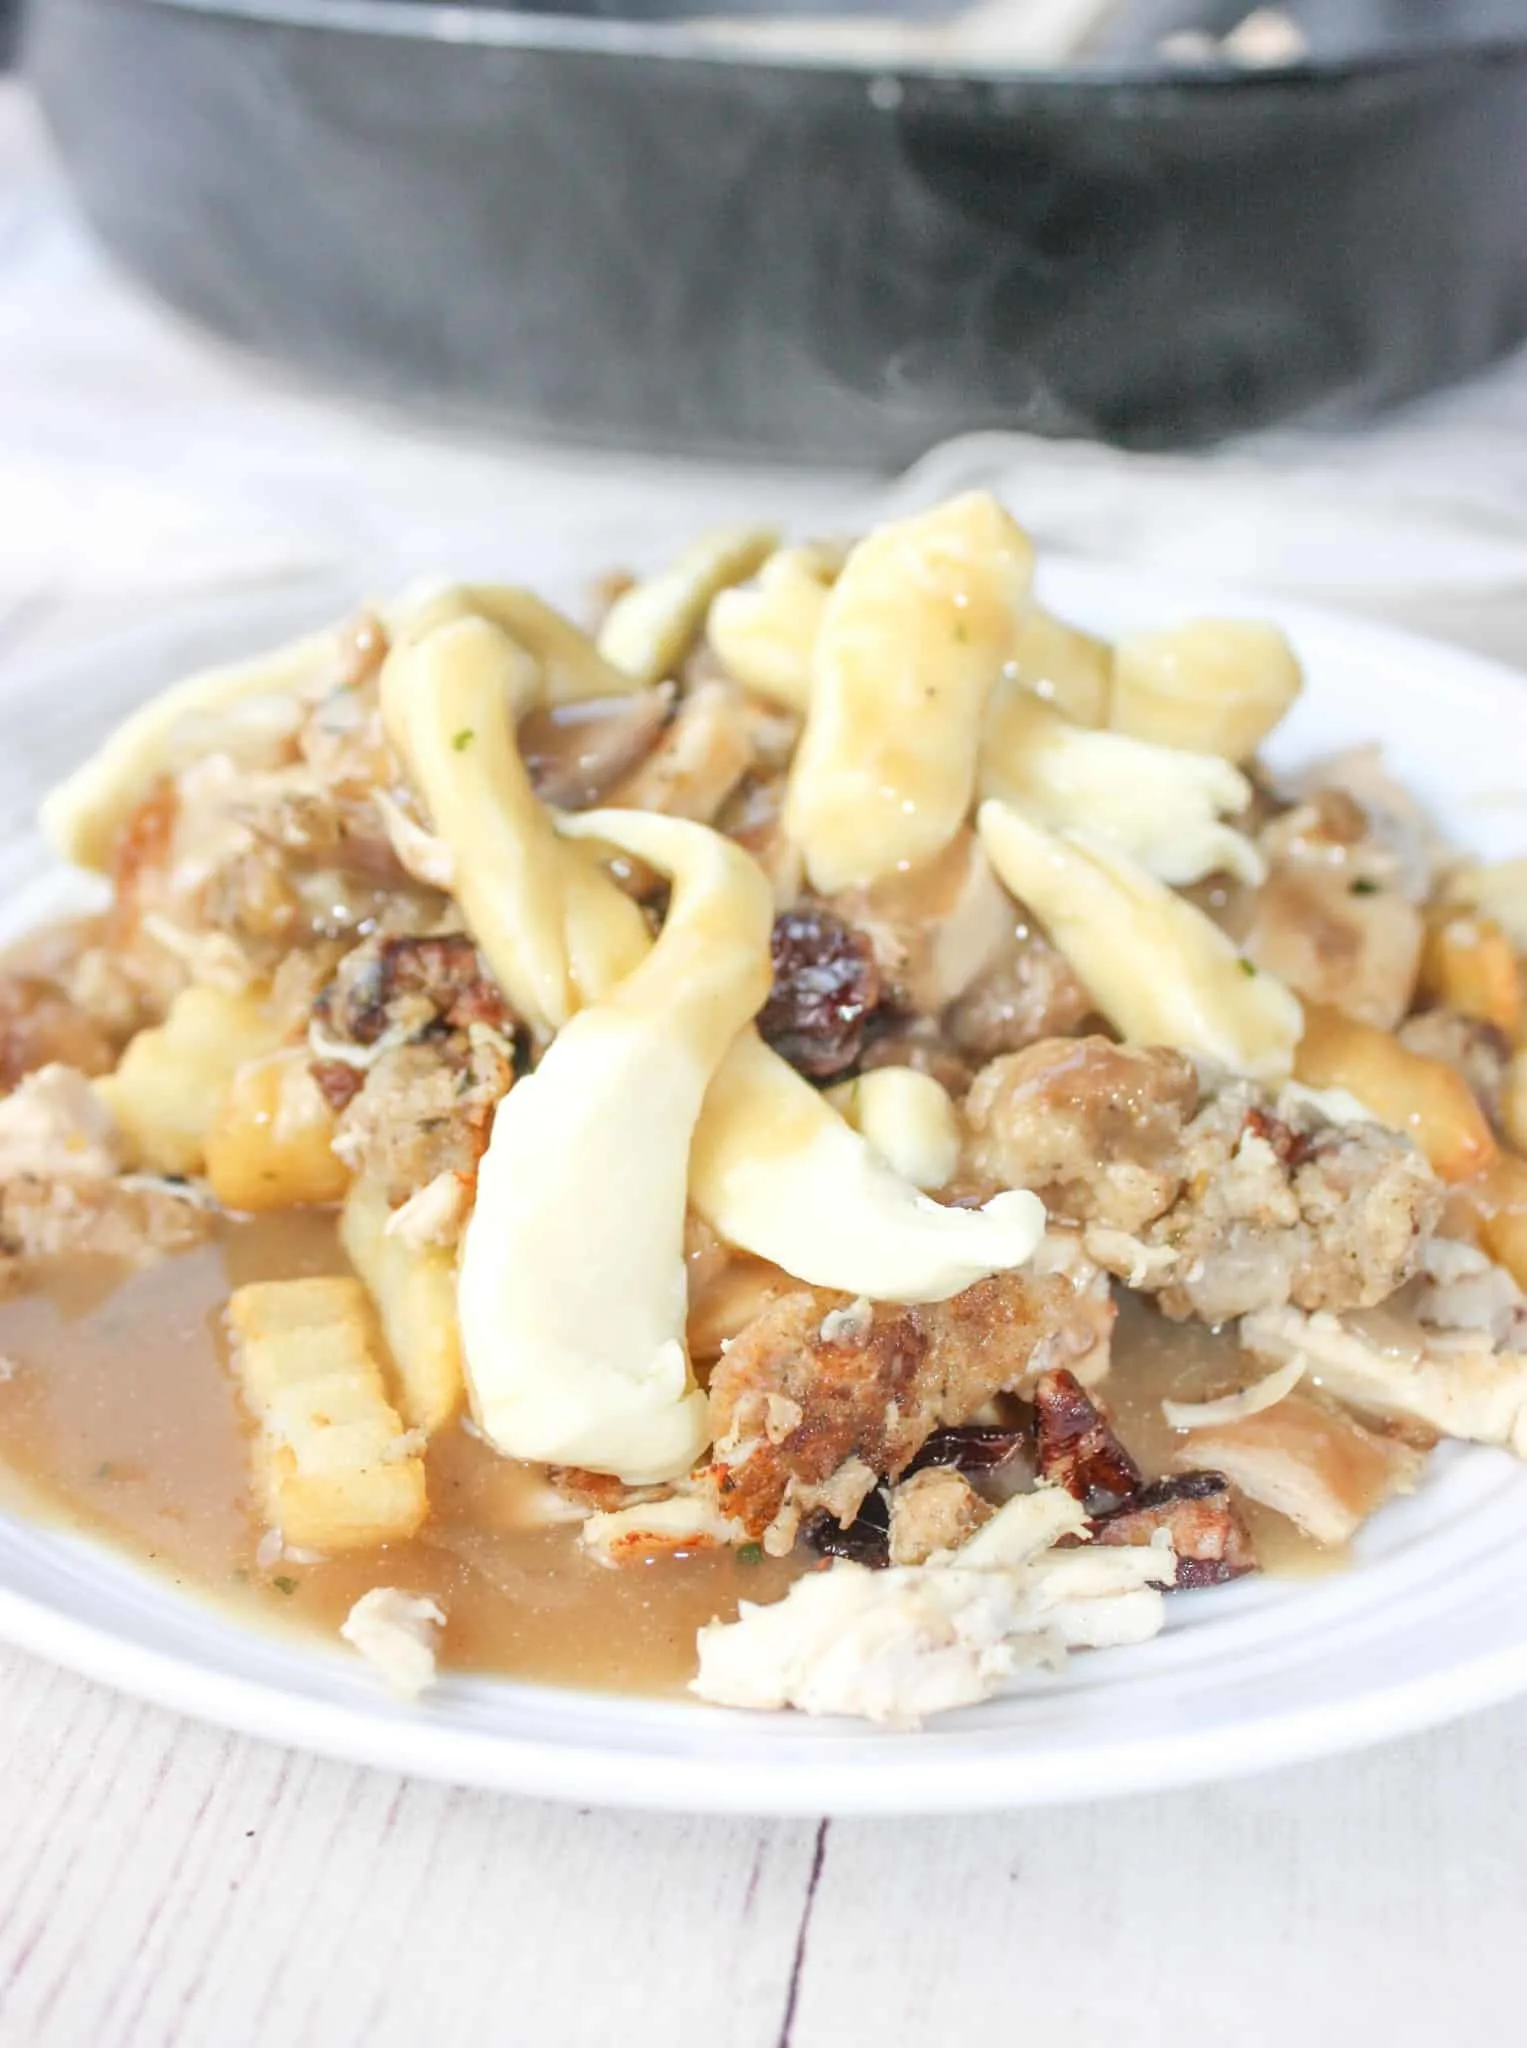 With Canadian Thanksgiving behind us and American Thanksgiving around the corner, Festive Poutine is an easy, tasty way to use up some holiday meal leftovers.